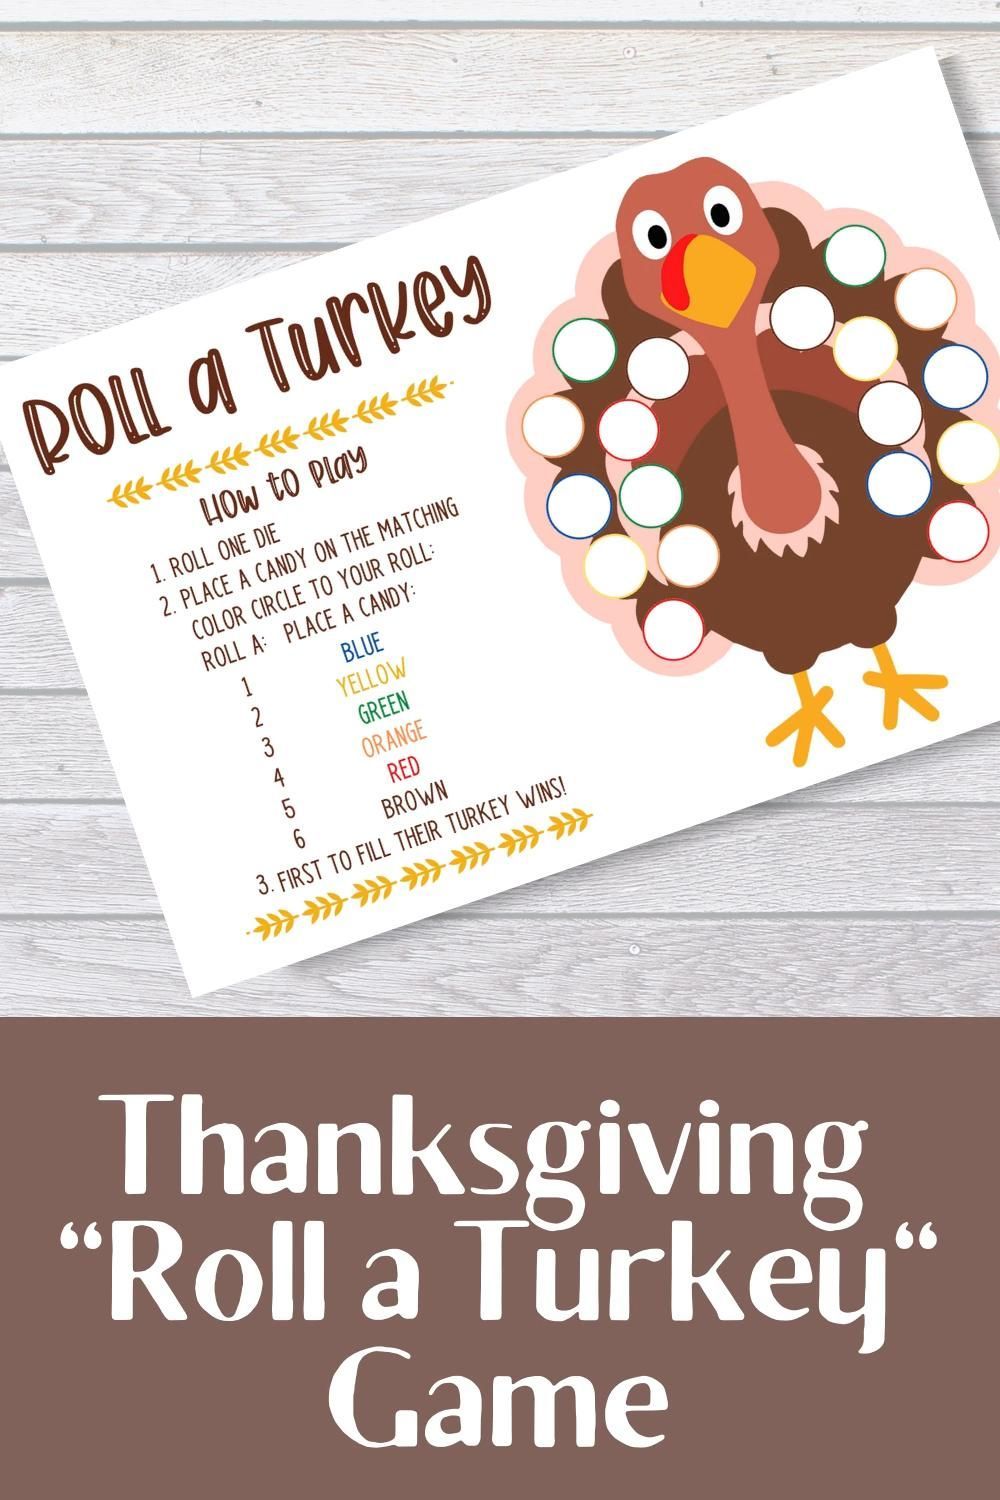 Roll a Turkey Thanksgiving Kids Game -   19 thanksgiving crafts for kids ideas